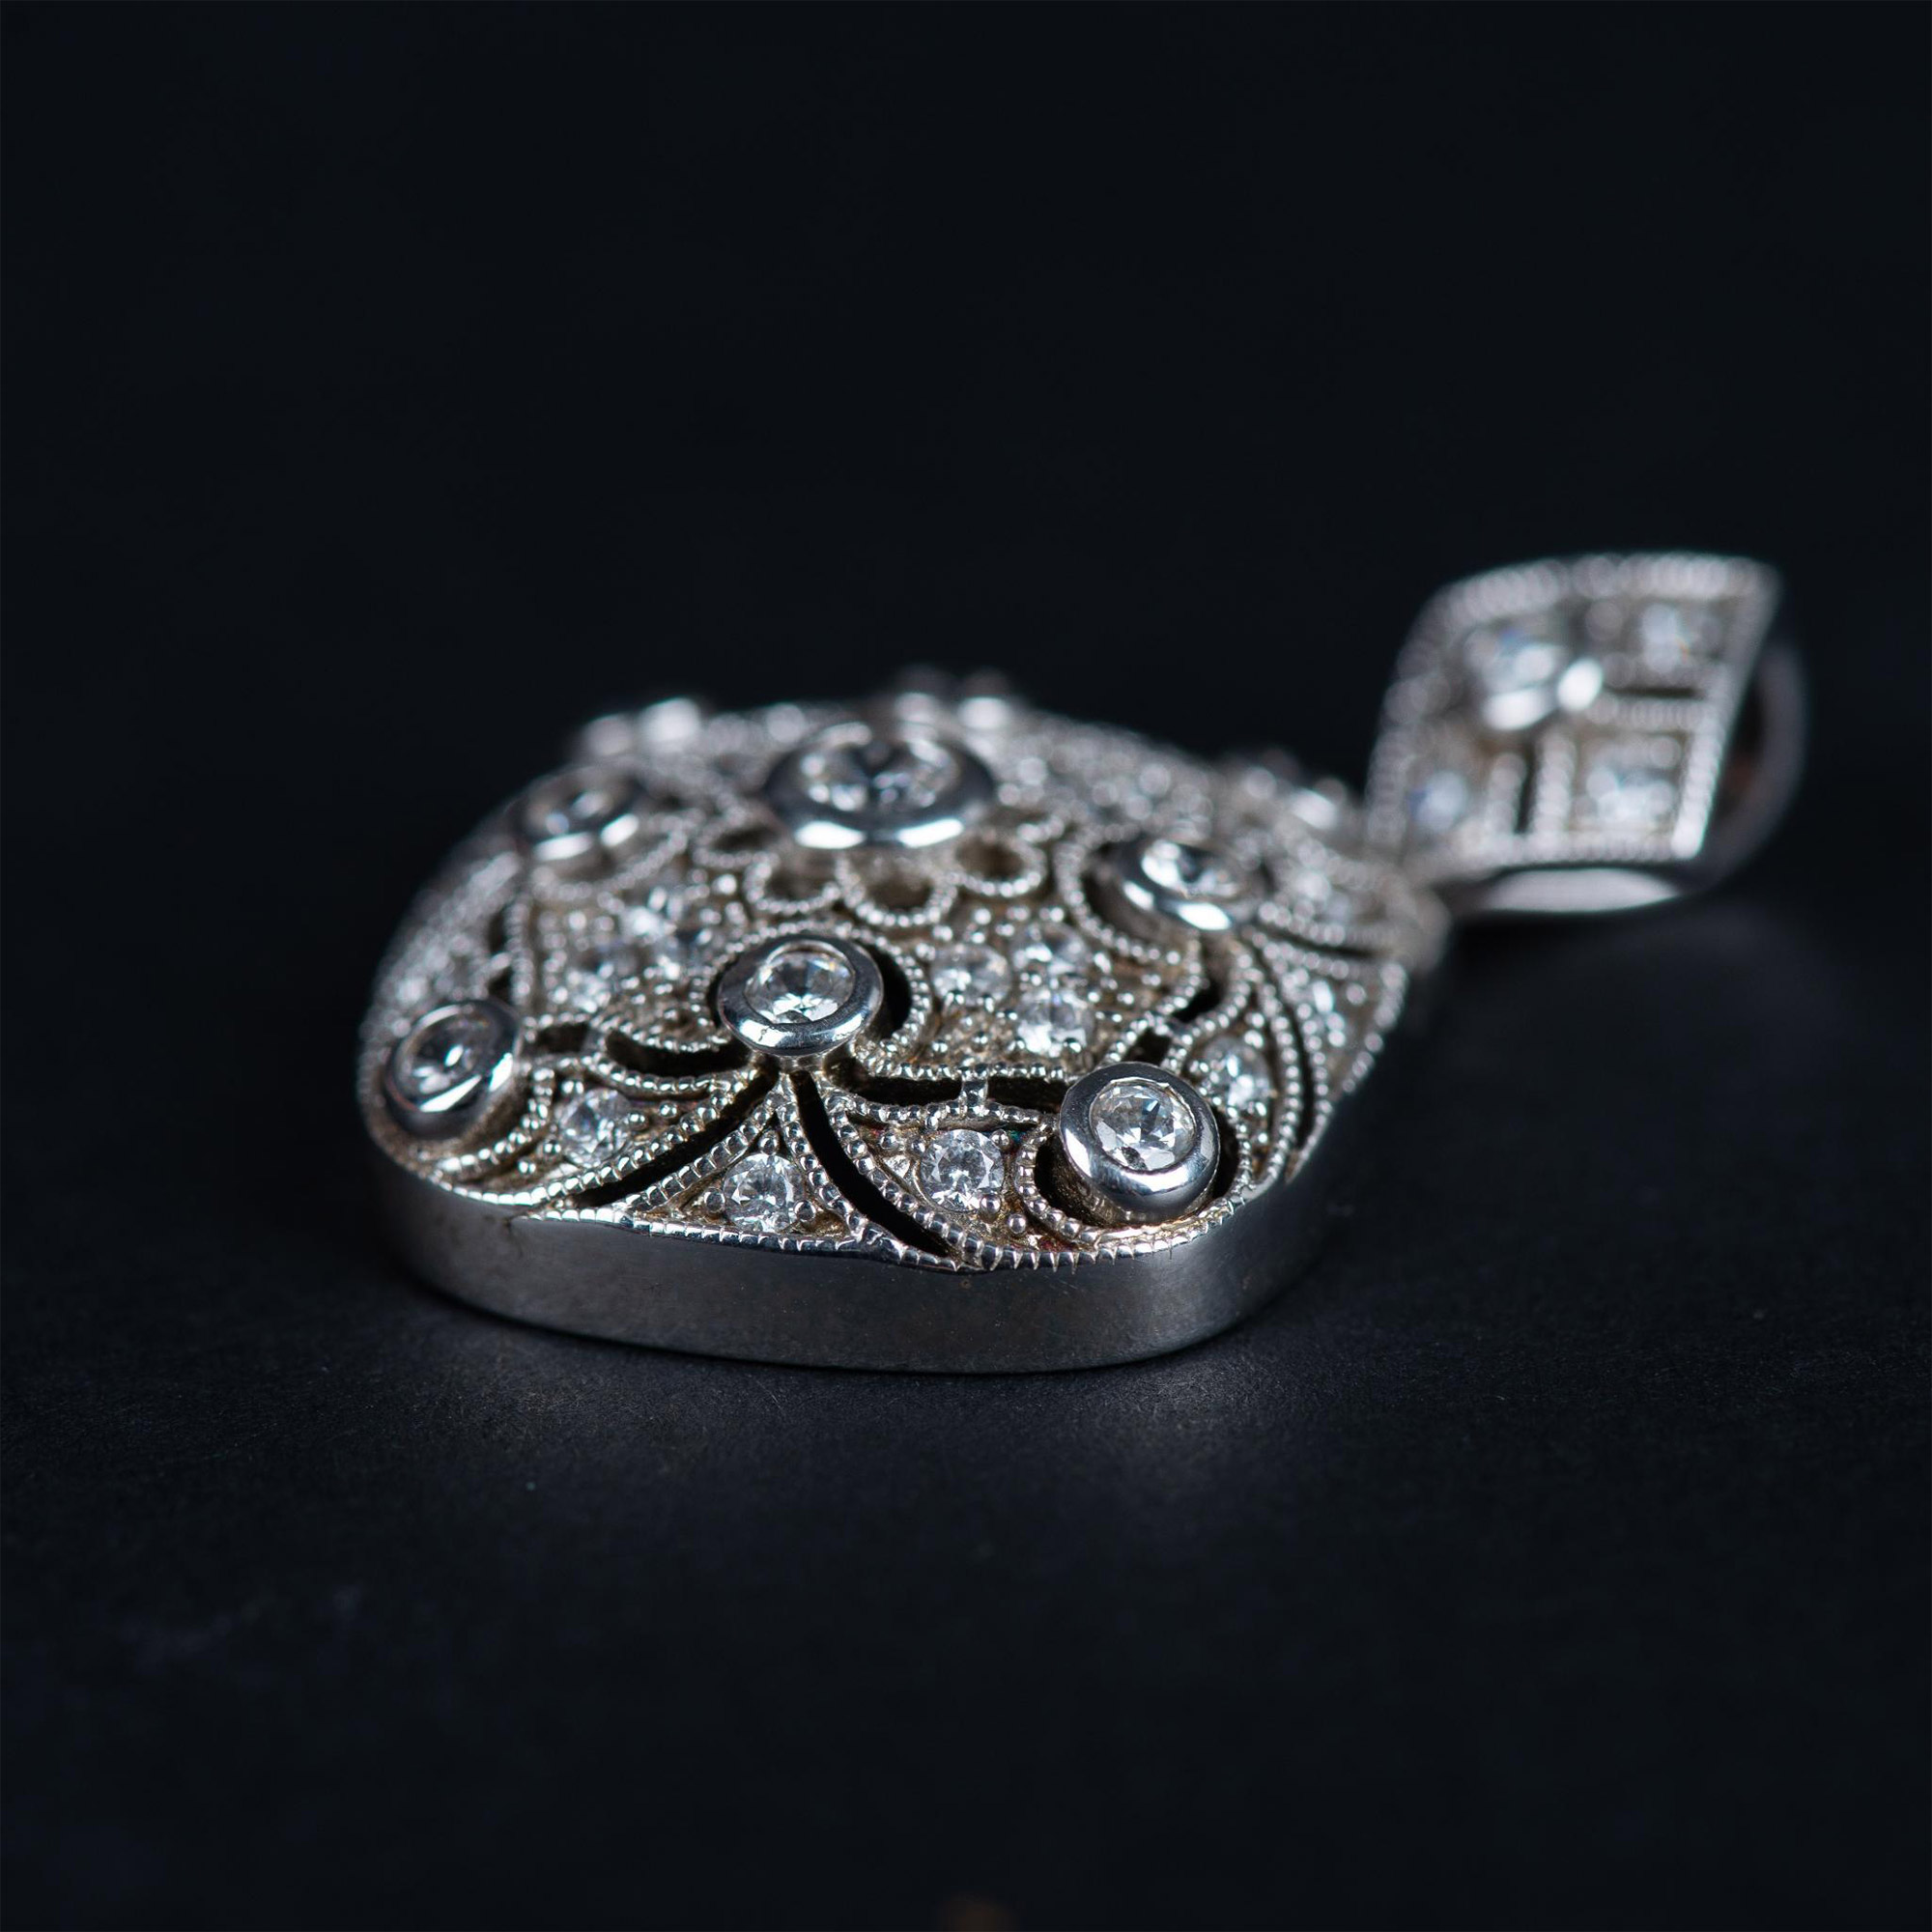 Gorgeous Ornate Sterling Silver Filigree & CZ Pendant - Image 5 of 5